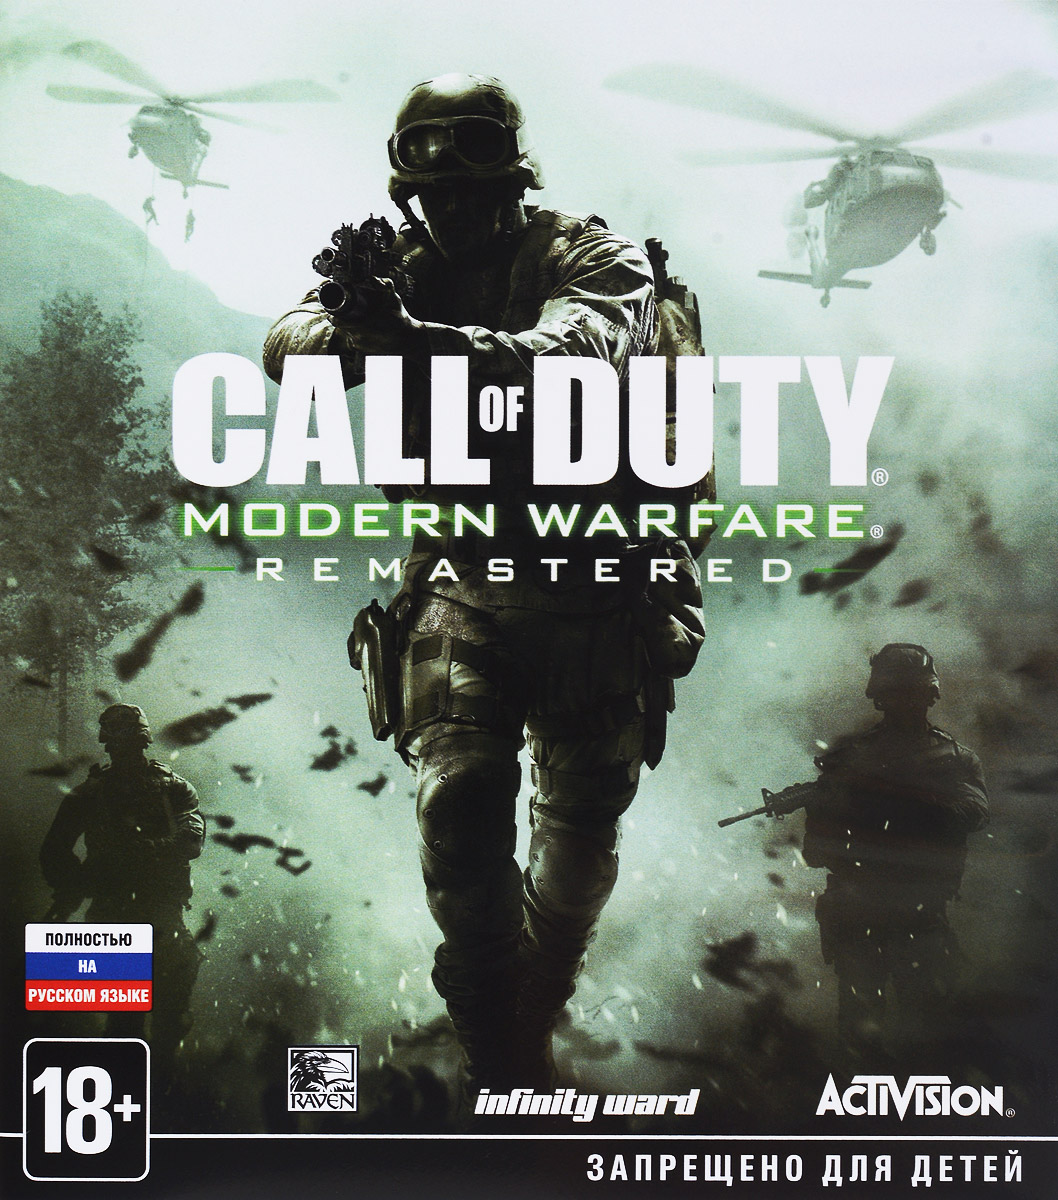 Call of duty remastered ps4. Call of Duty 4 Modern Warfare ps4. Call of Duty MW 2 Remastered ps4. Cod Remastered ps4. Call of Duty Modern Warfare 2 пс4.